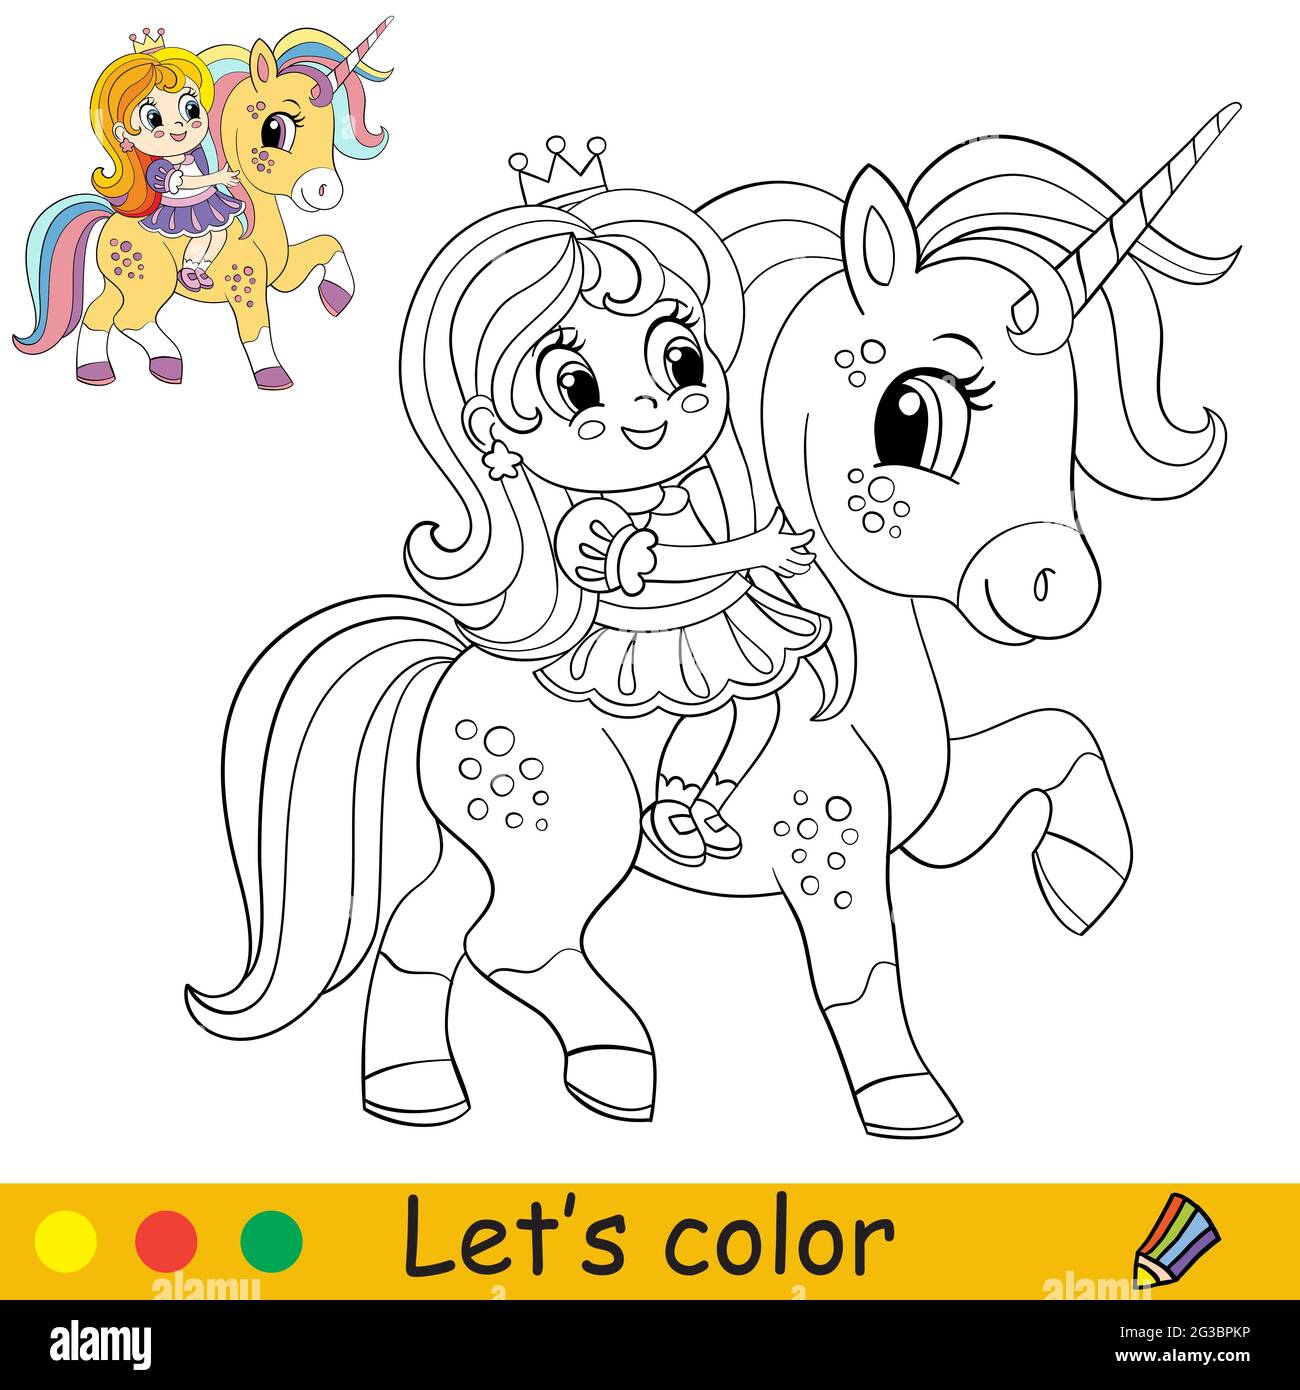 Cute little girl riding a magical unicorn. Coloring book page with colorful template for kids. Vector isolated illustration. For coloring book, print, Stock Vector